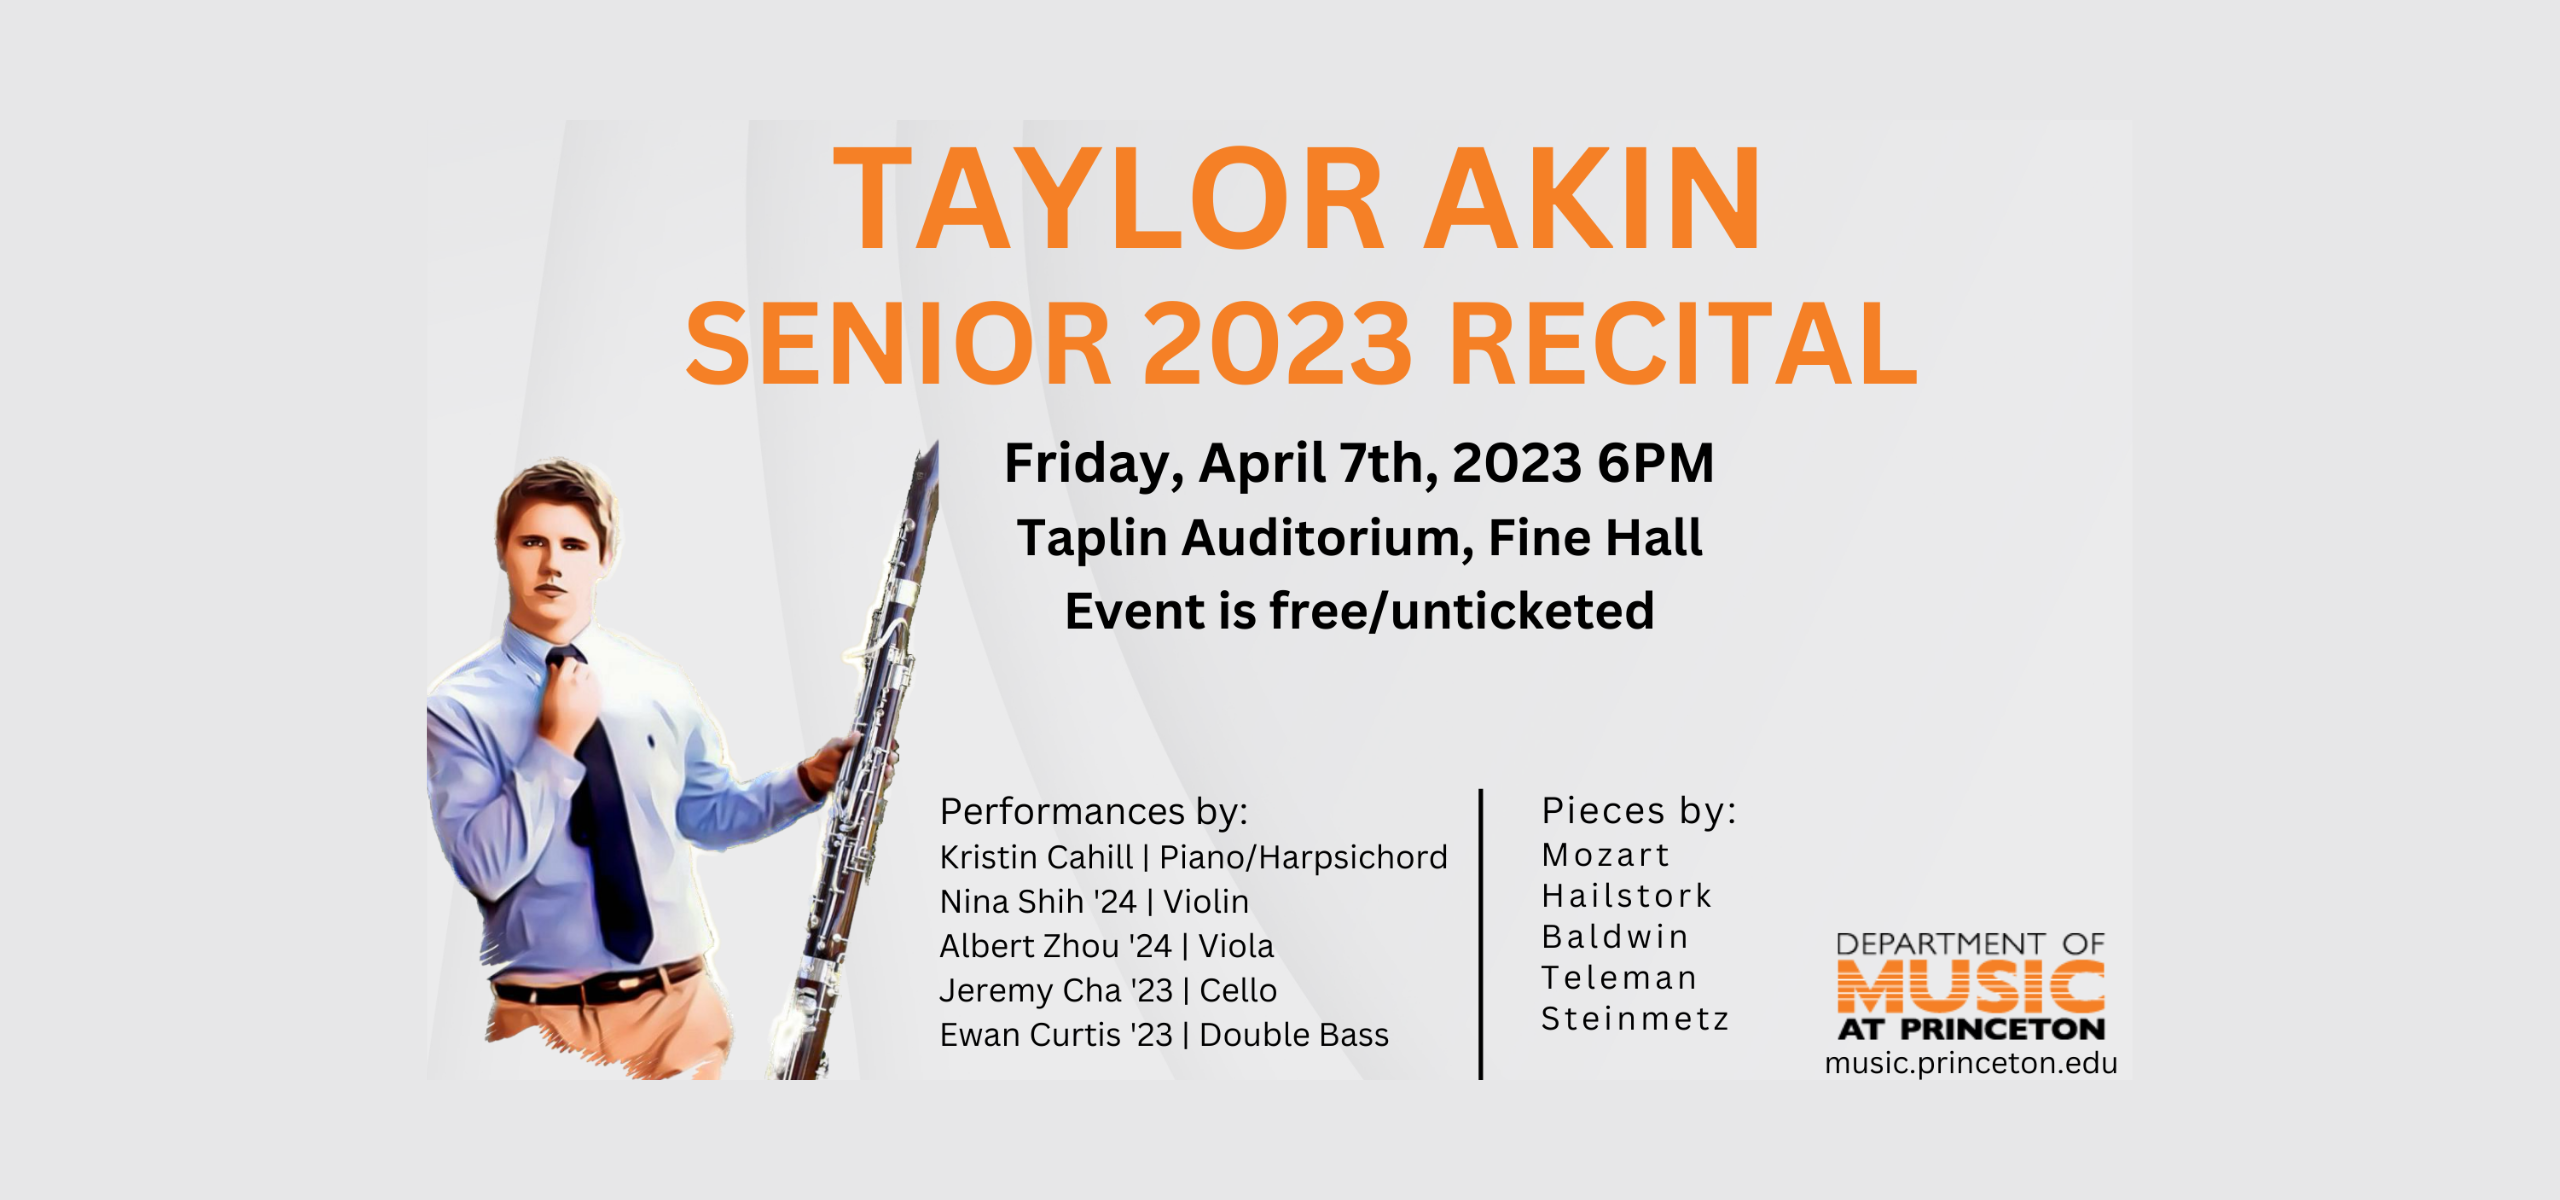 poster with gray patterned background with cartoon/avatar image of Taylor with text that reads "Taylor Akin Senior 2023 Recital." Read the description for more information.